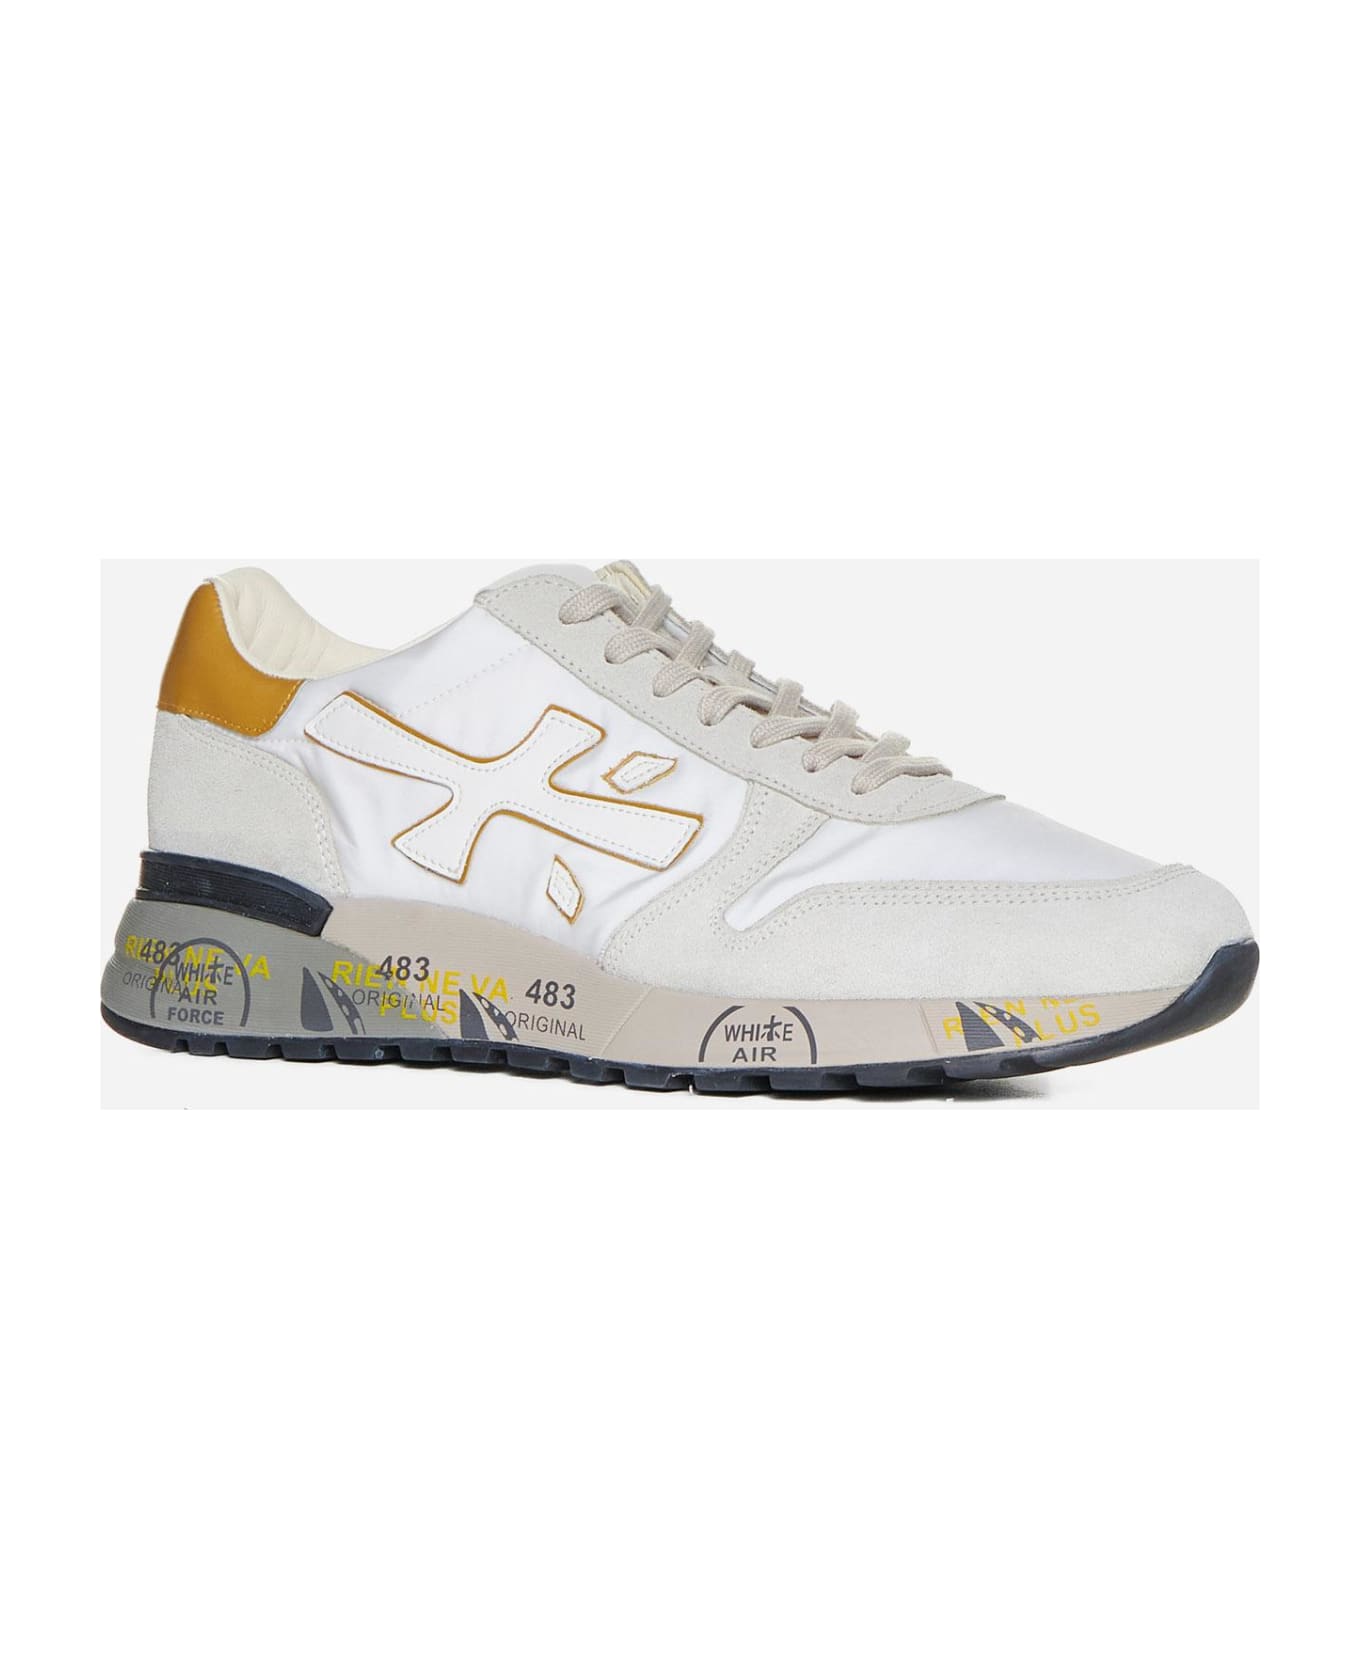 Premiata Mick Suede, Nylon And Leather Sneakers - Bianco スニーカー